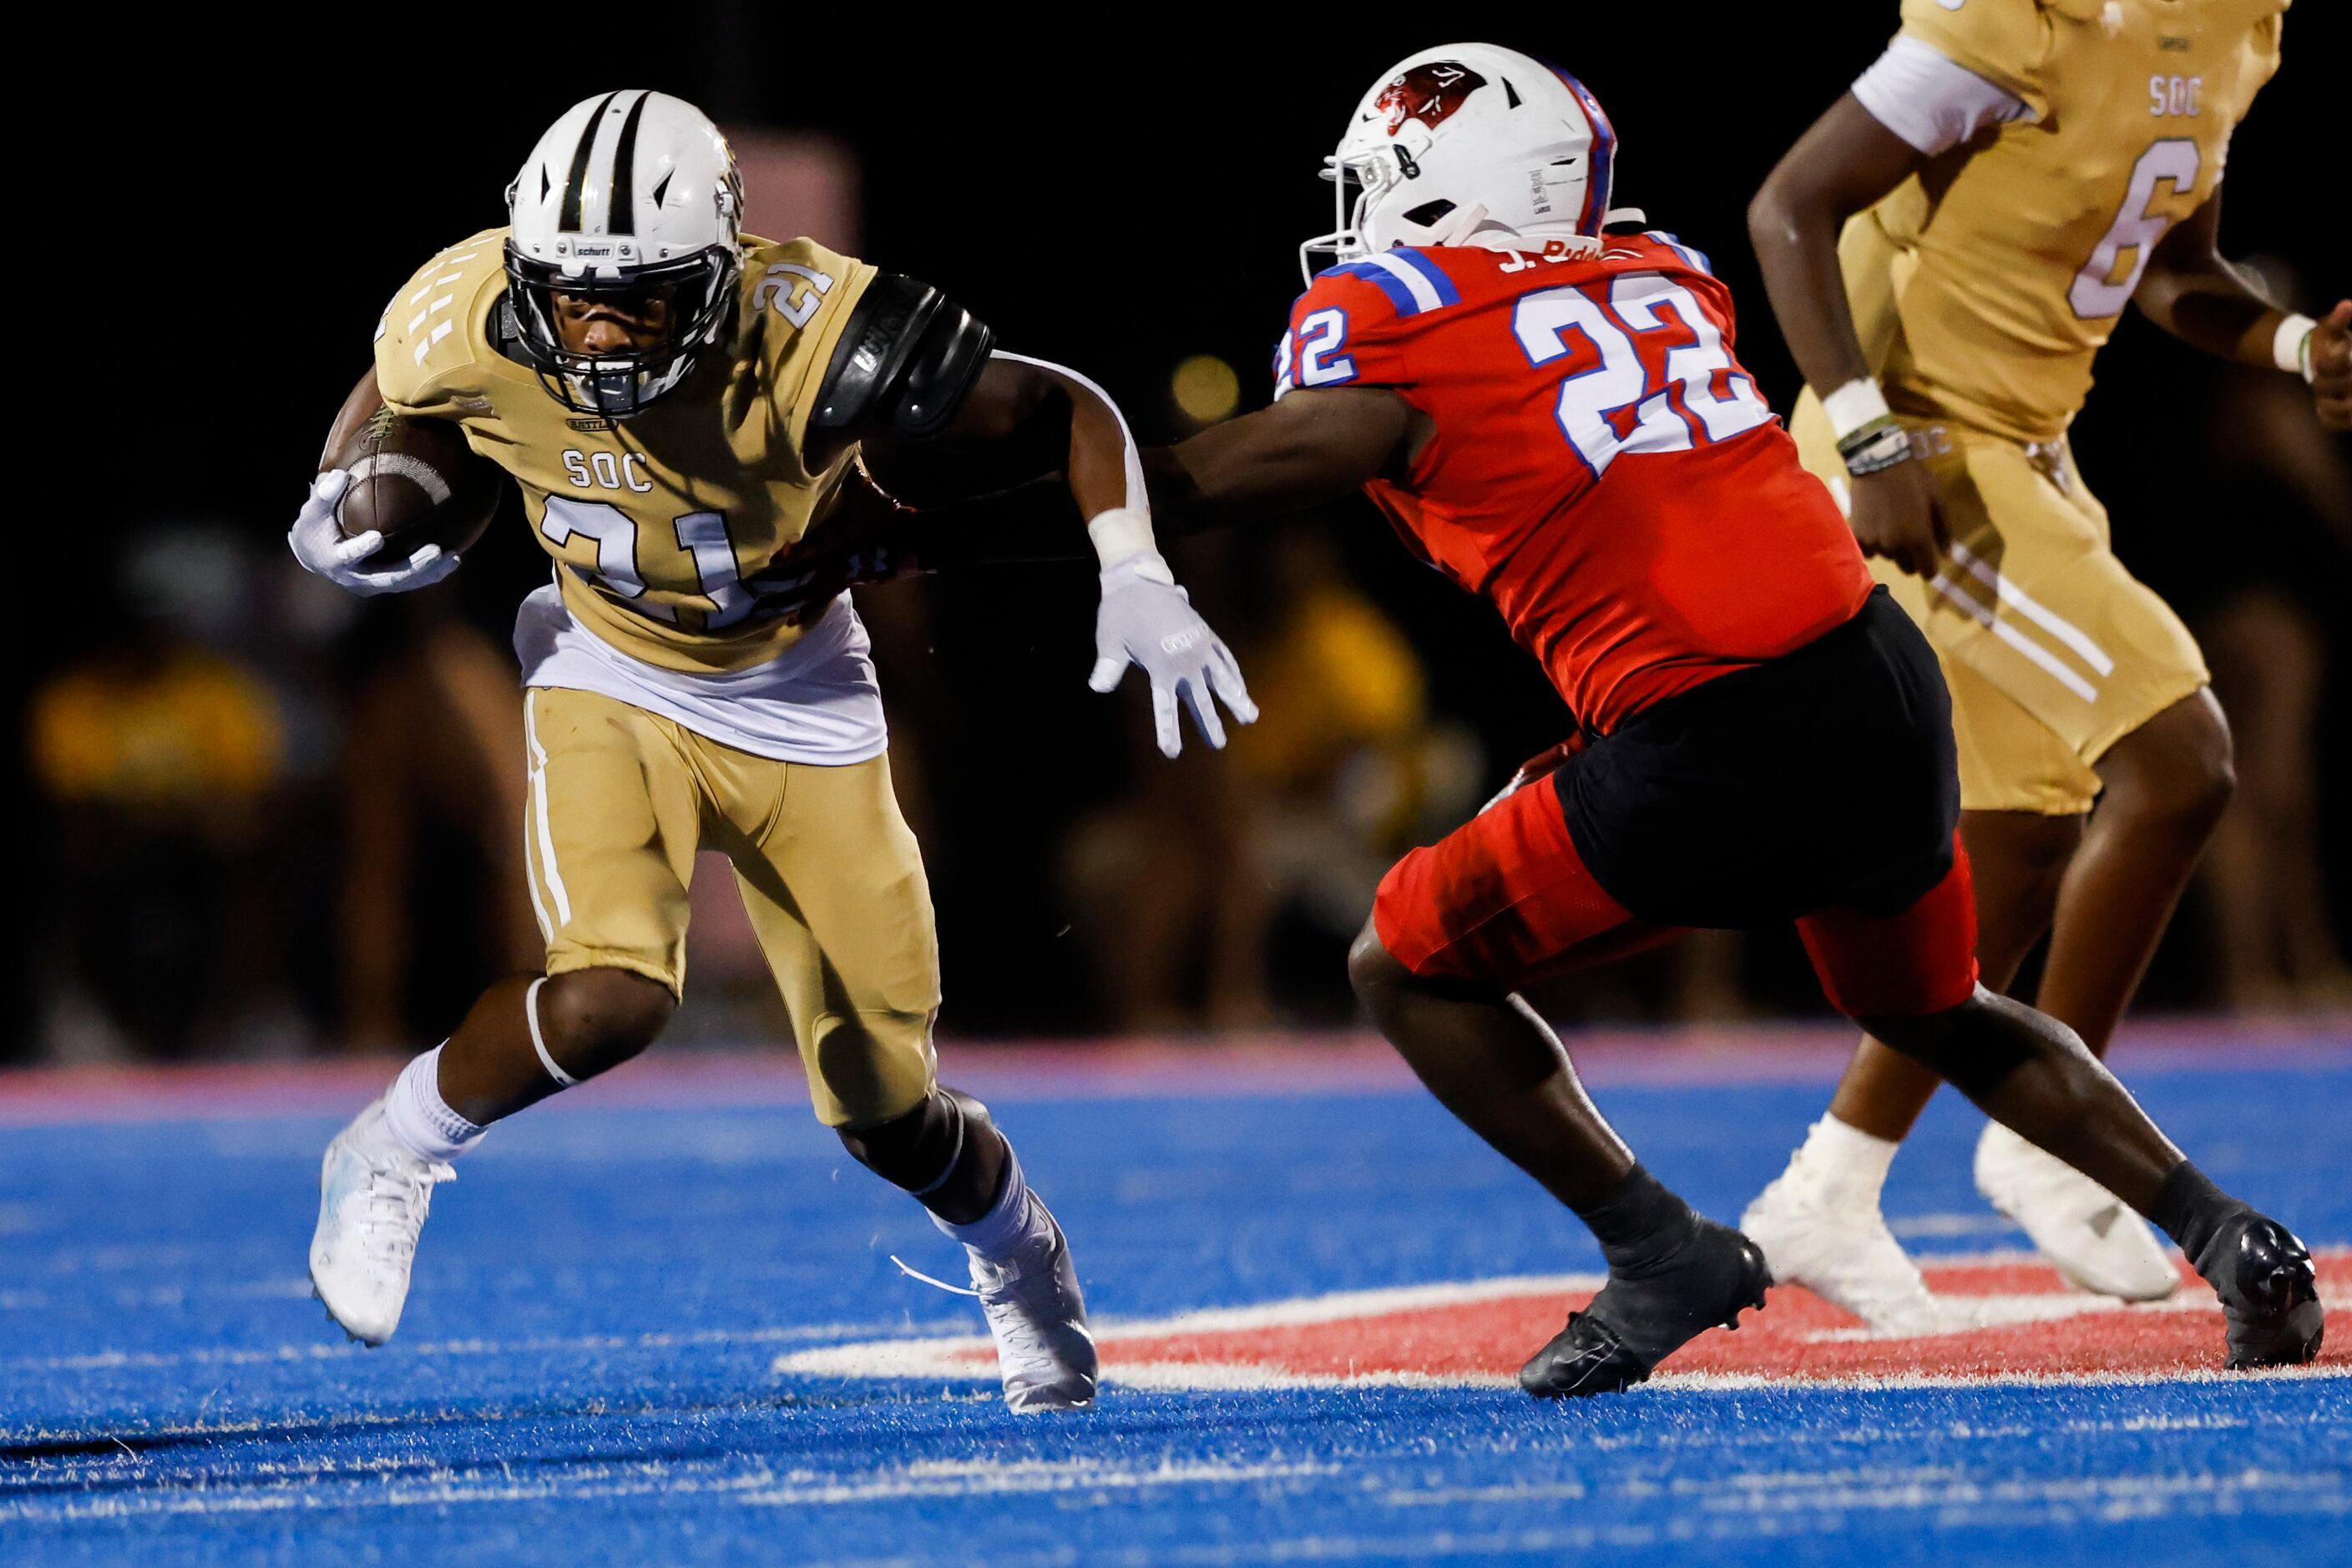 South Oak Cliff’s running back Danny Green (21) attempts to run past Parish Episcopal’s...